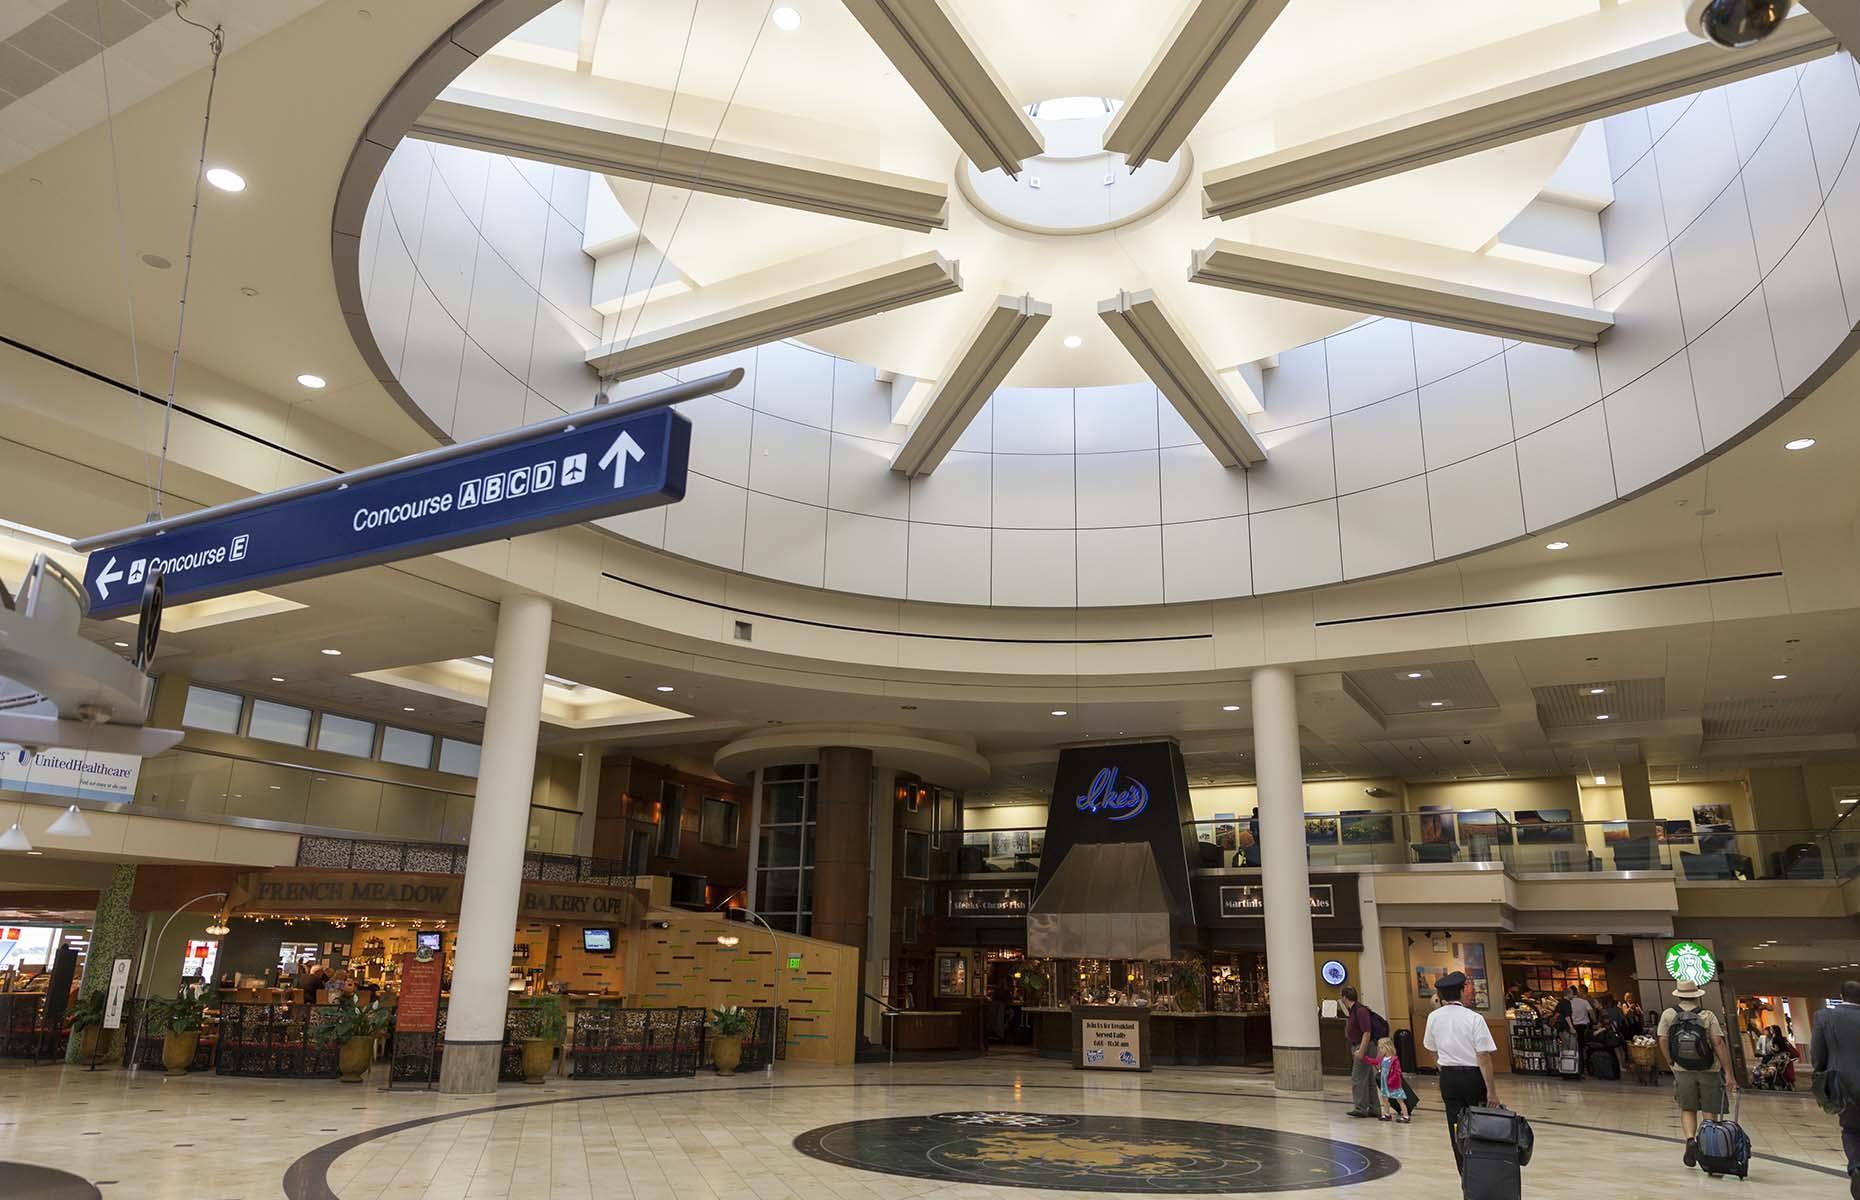 <p>Ranking in third place out of Mega Airports on <a href="https://www.jdpower.com/business/press-releases/2021-north-america-airport-satisfaction-study">J.D. Power’s 2021 Airport Satisfaction Index</a>, this bumper airport is clearly a hit with flyers. It’s within easy reach of the Twin Cities and offers 163 direct flight routes from two terminals, which includes 27 international destinations. <a href="https://www.yelp.com/biz/msp-airport-terminal-1-lindbergh-saint-paul?start=10">Recent travelers</a> speak highly of its customer service, ease of navigation and wide choice of shops and restaurants.</p>